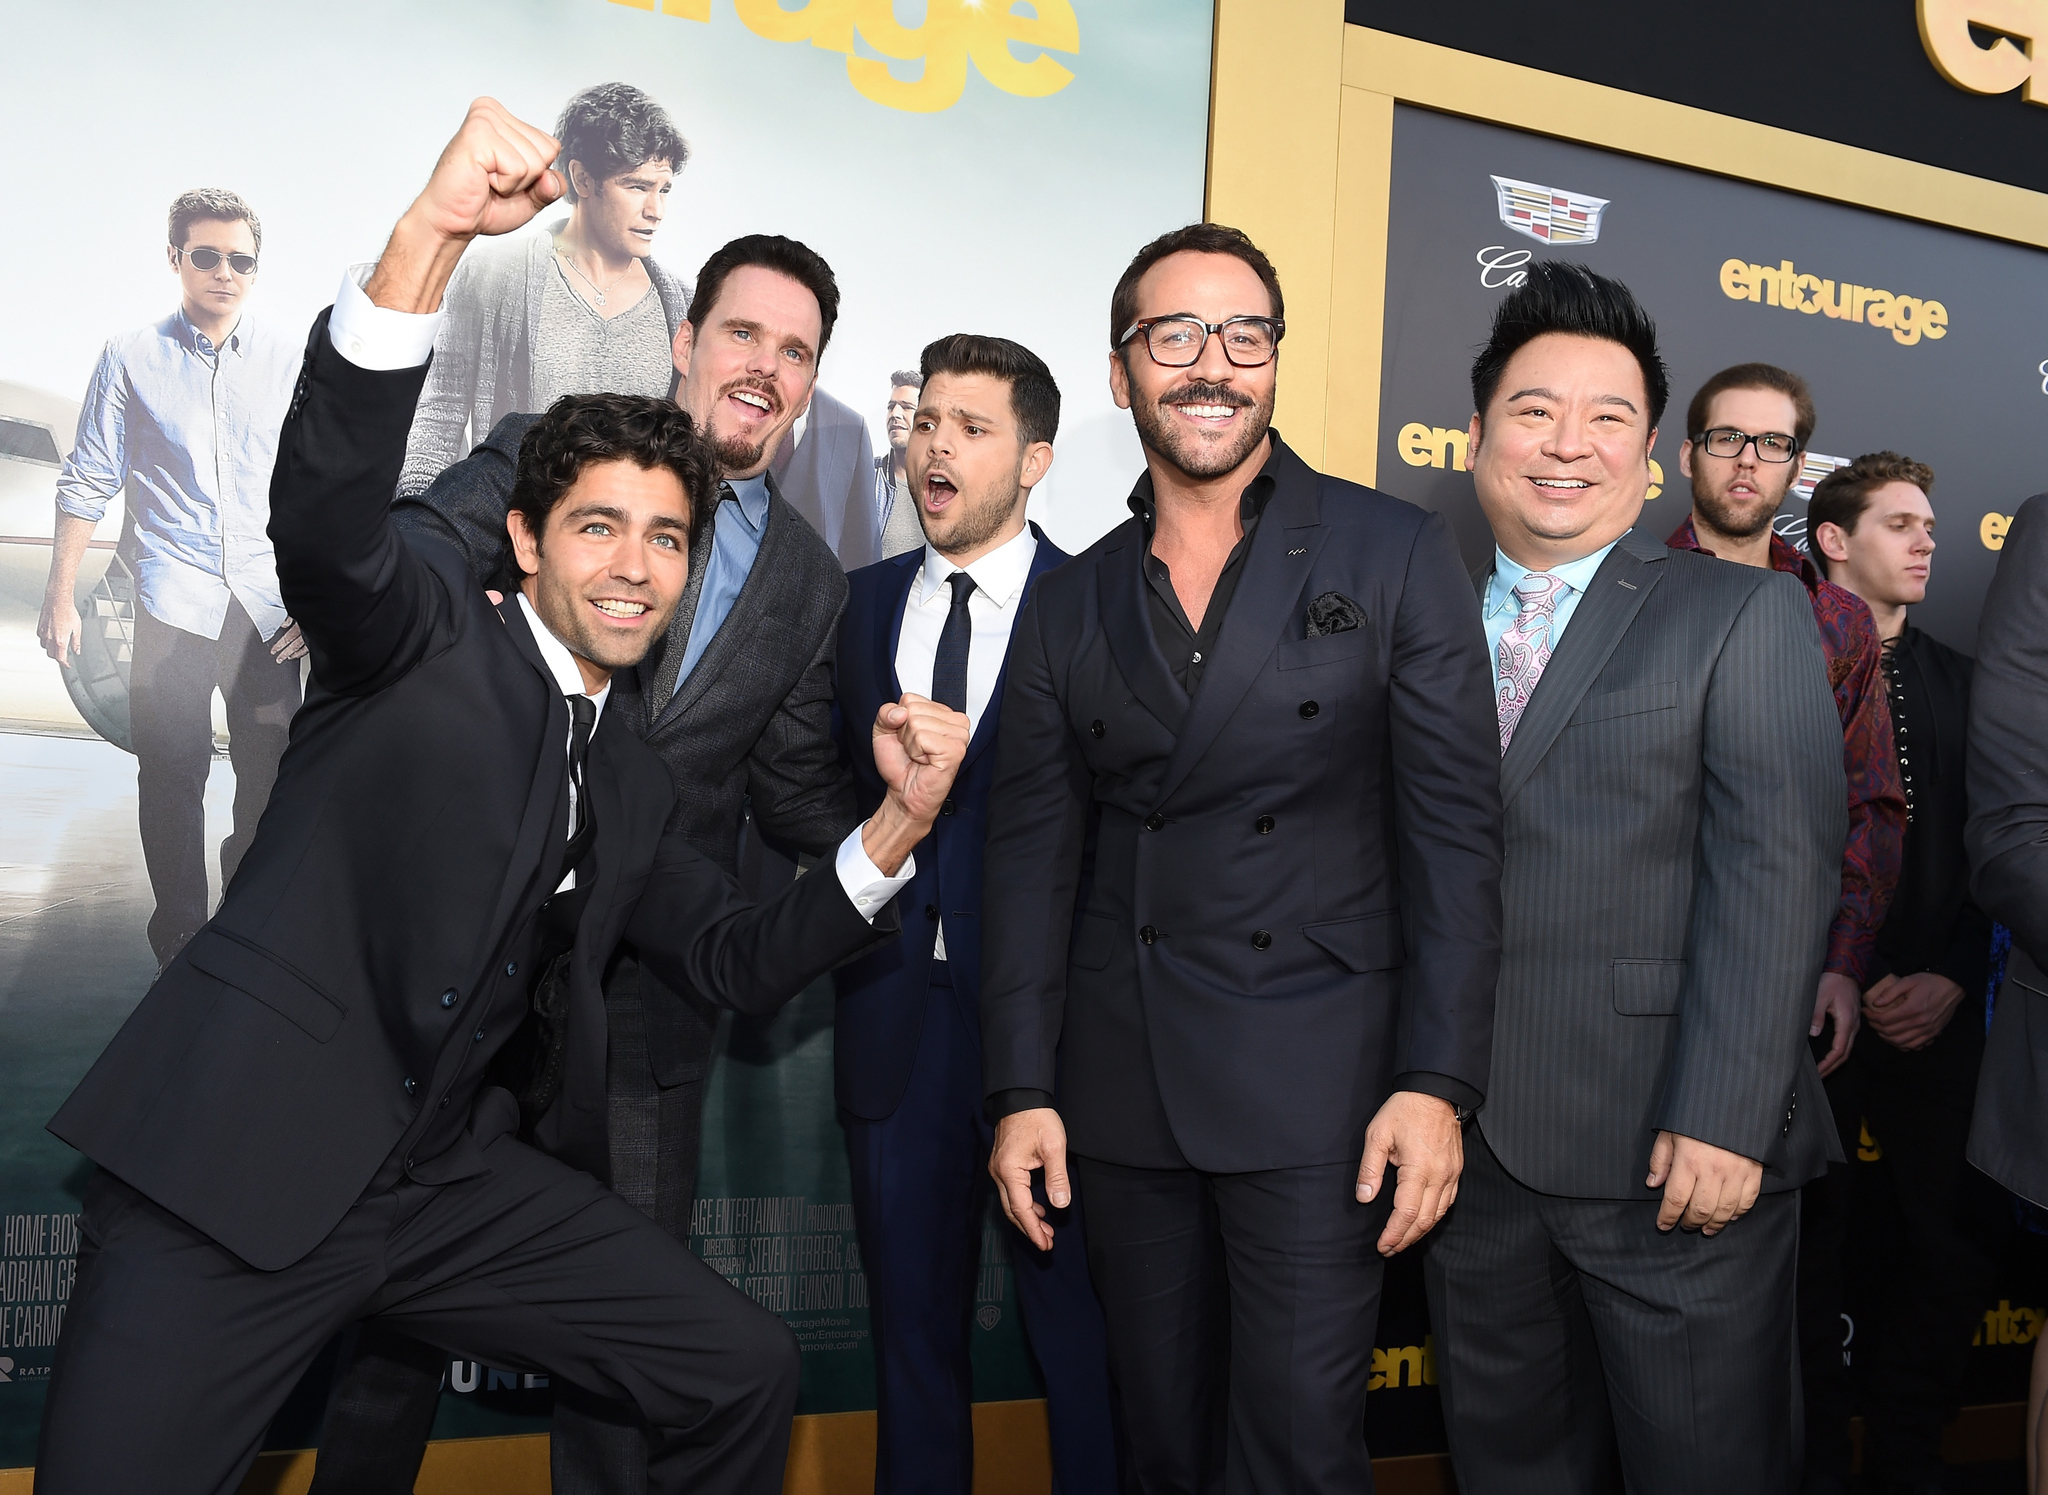 Kevin Dillon, Adrian Grenier, Jeremy Piven, Rex Lee and Jerry Ferrara at event of Entourage (2015)